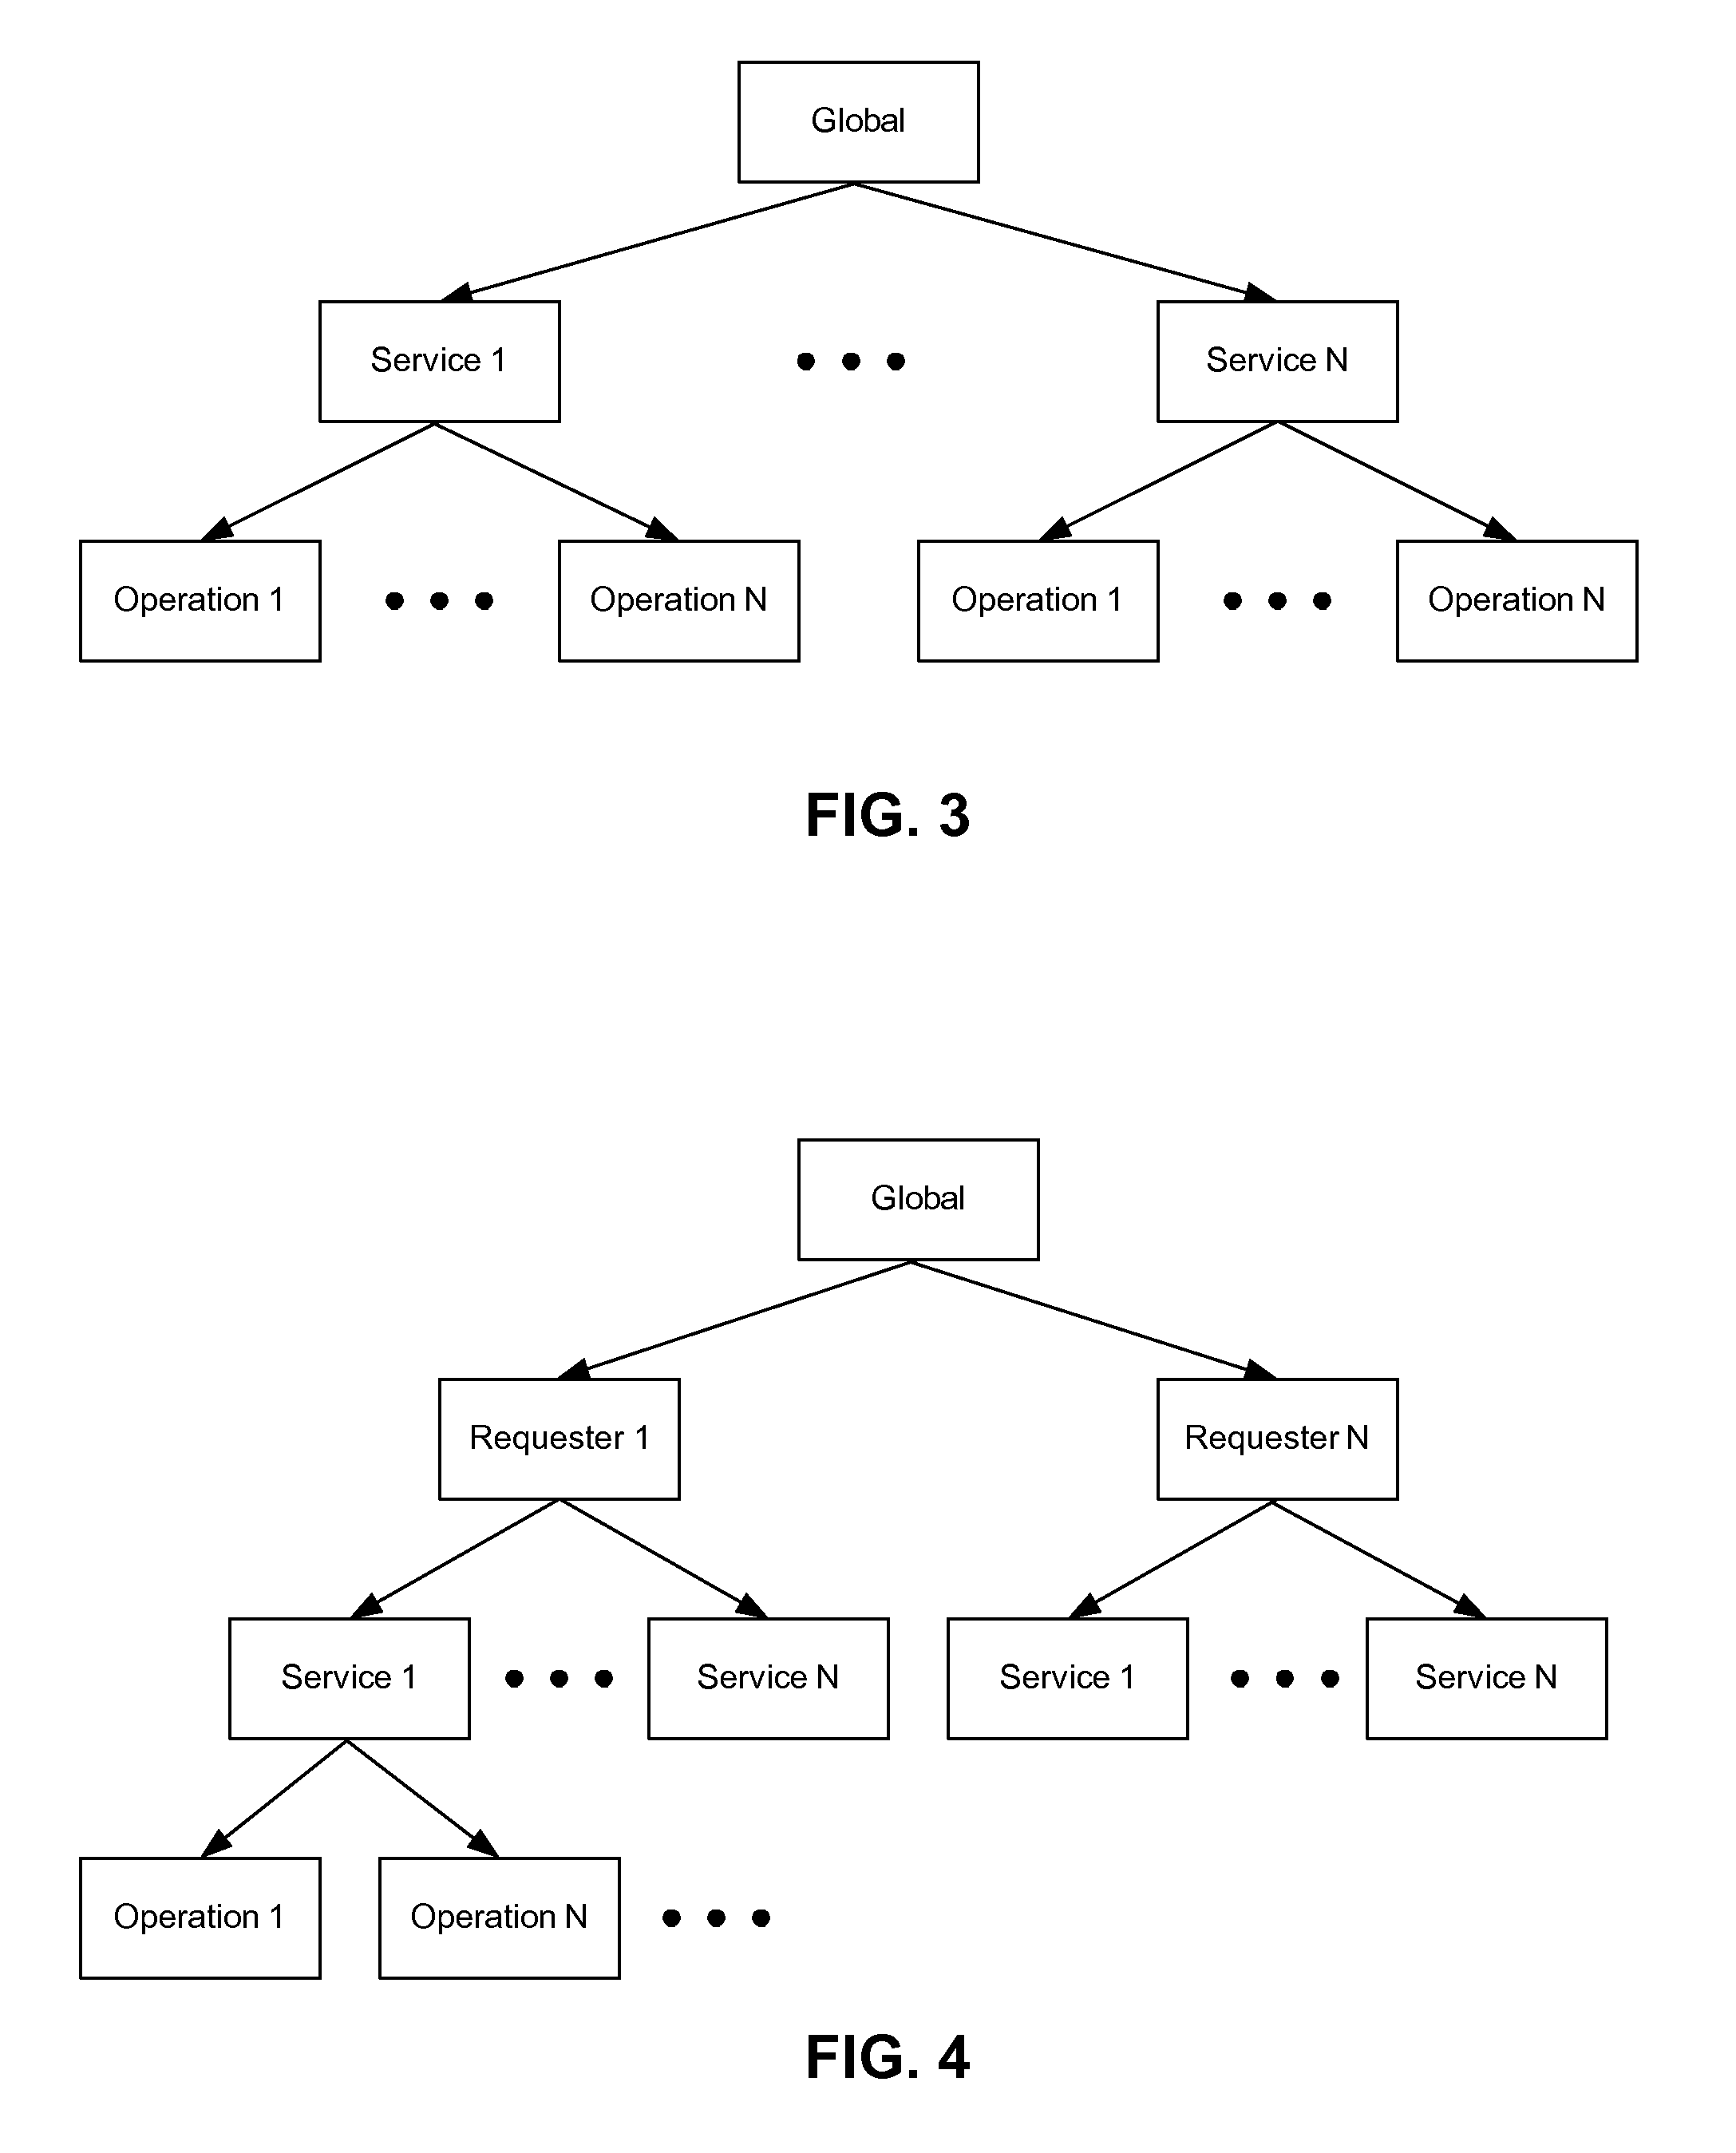 Method for Distributed Traffic Shaping across a Cluster